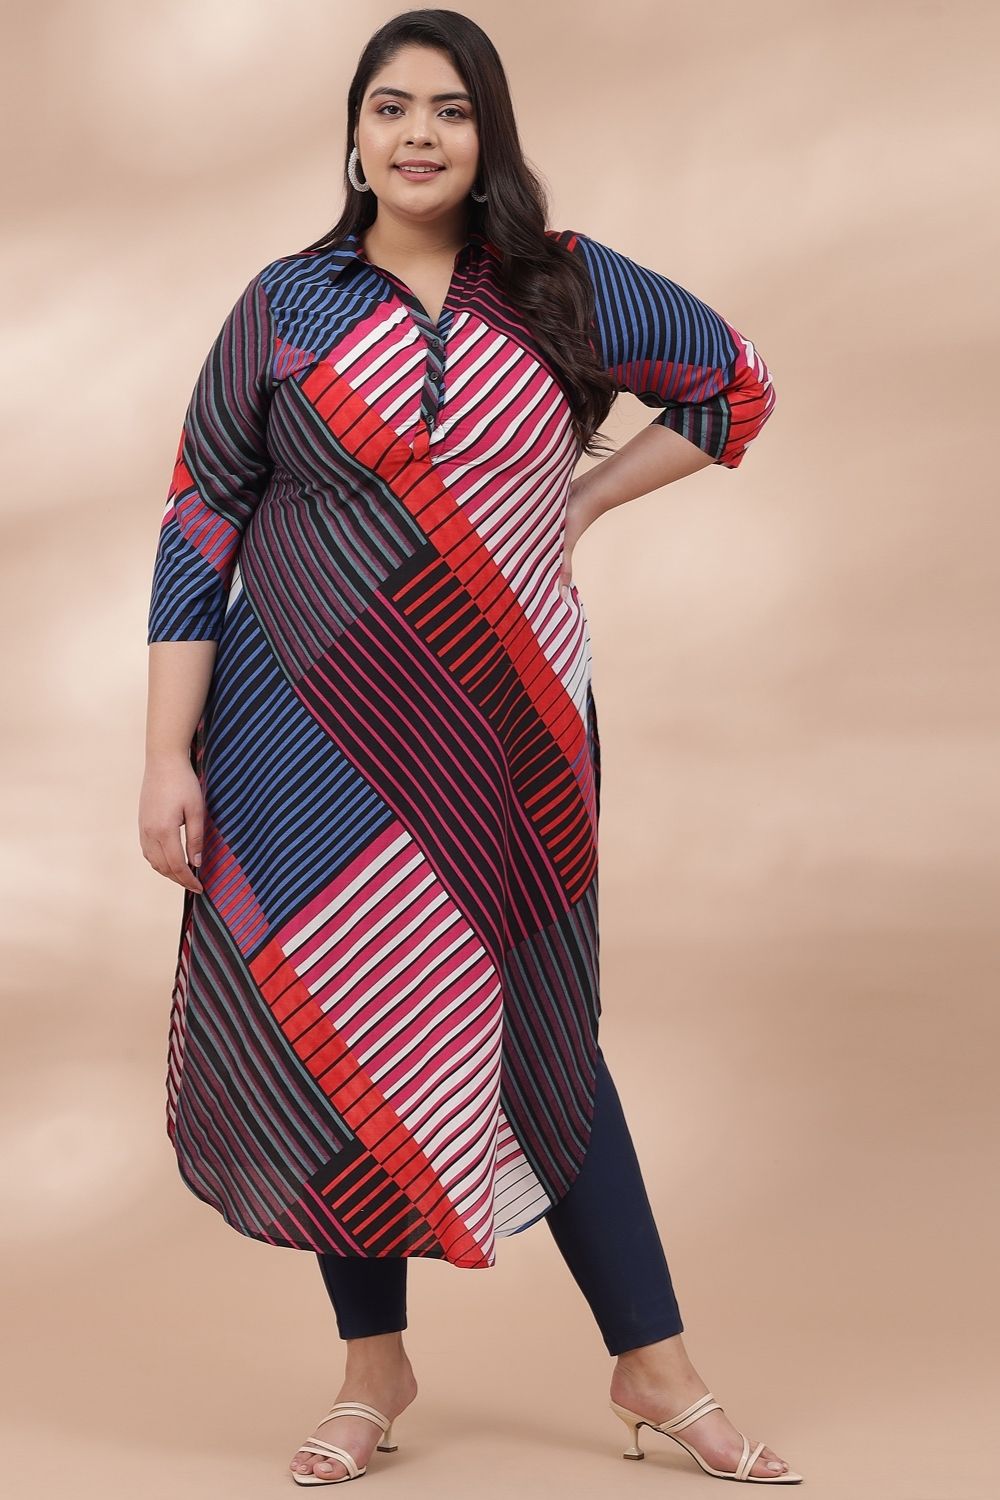 Premsetu Mal Cotton Print Naira Slit Cut Kurti On Embroidered Thread Work  With 3/4th Sleeve(PS1267A) at Rs 1095 | Kurti & Bottom in Surat | ID:  2850655831891